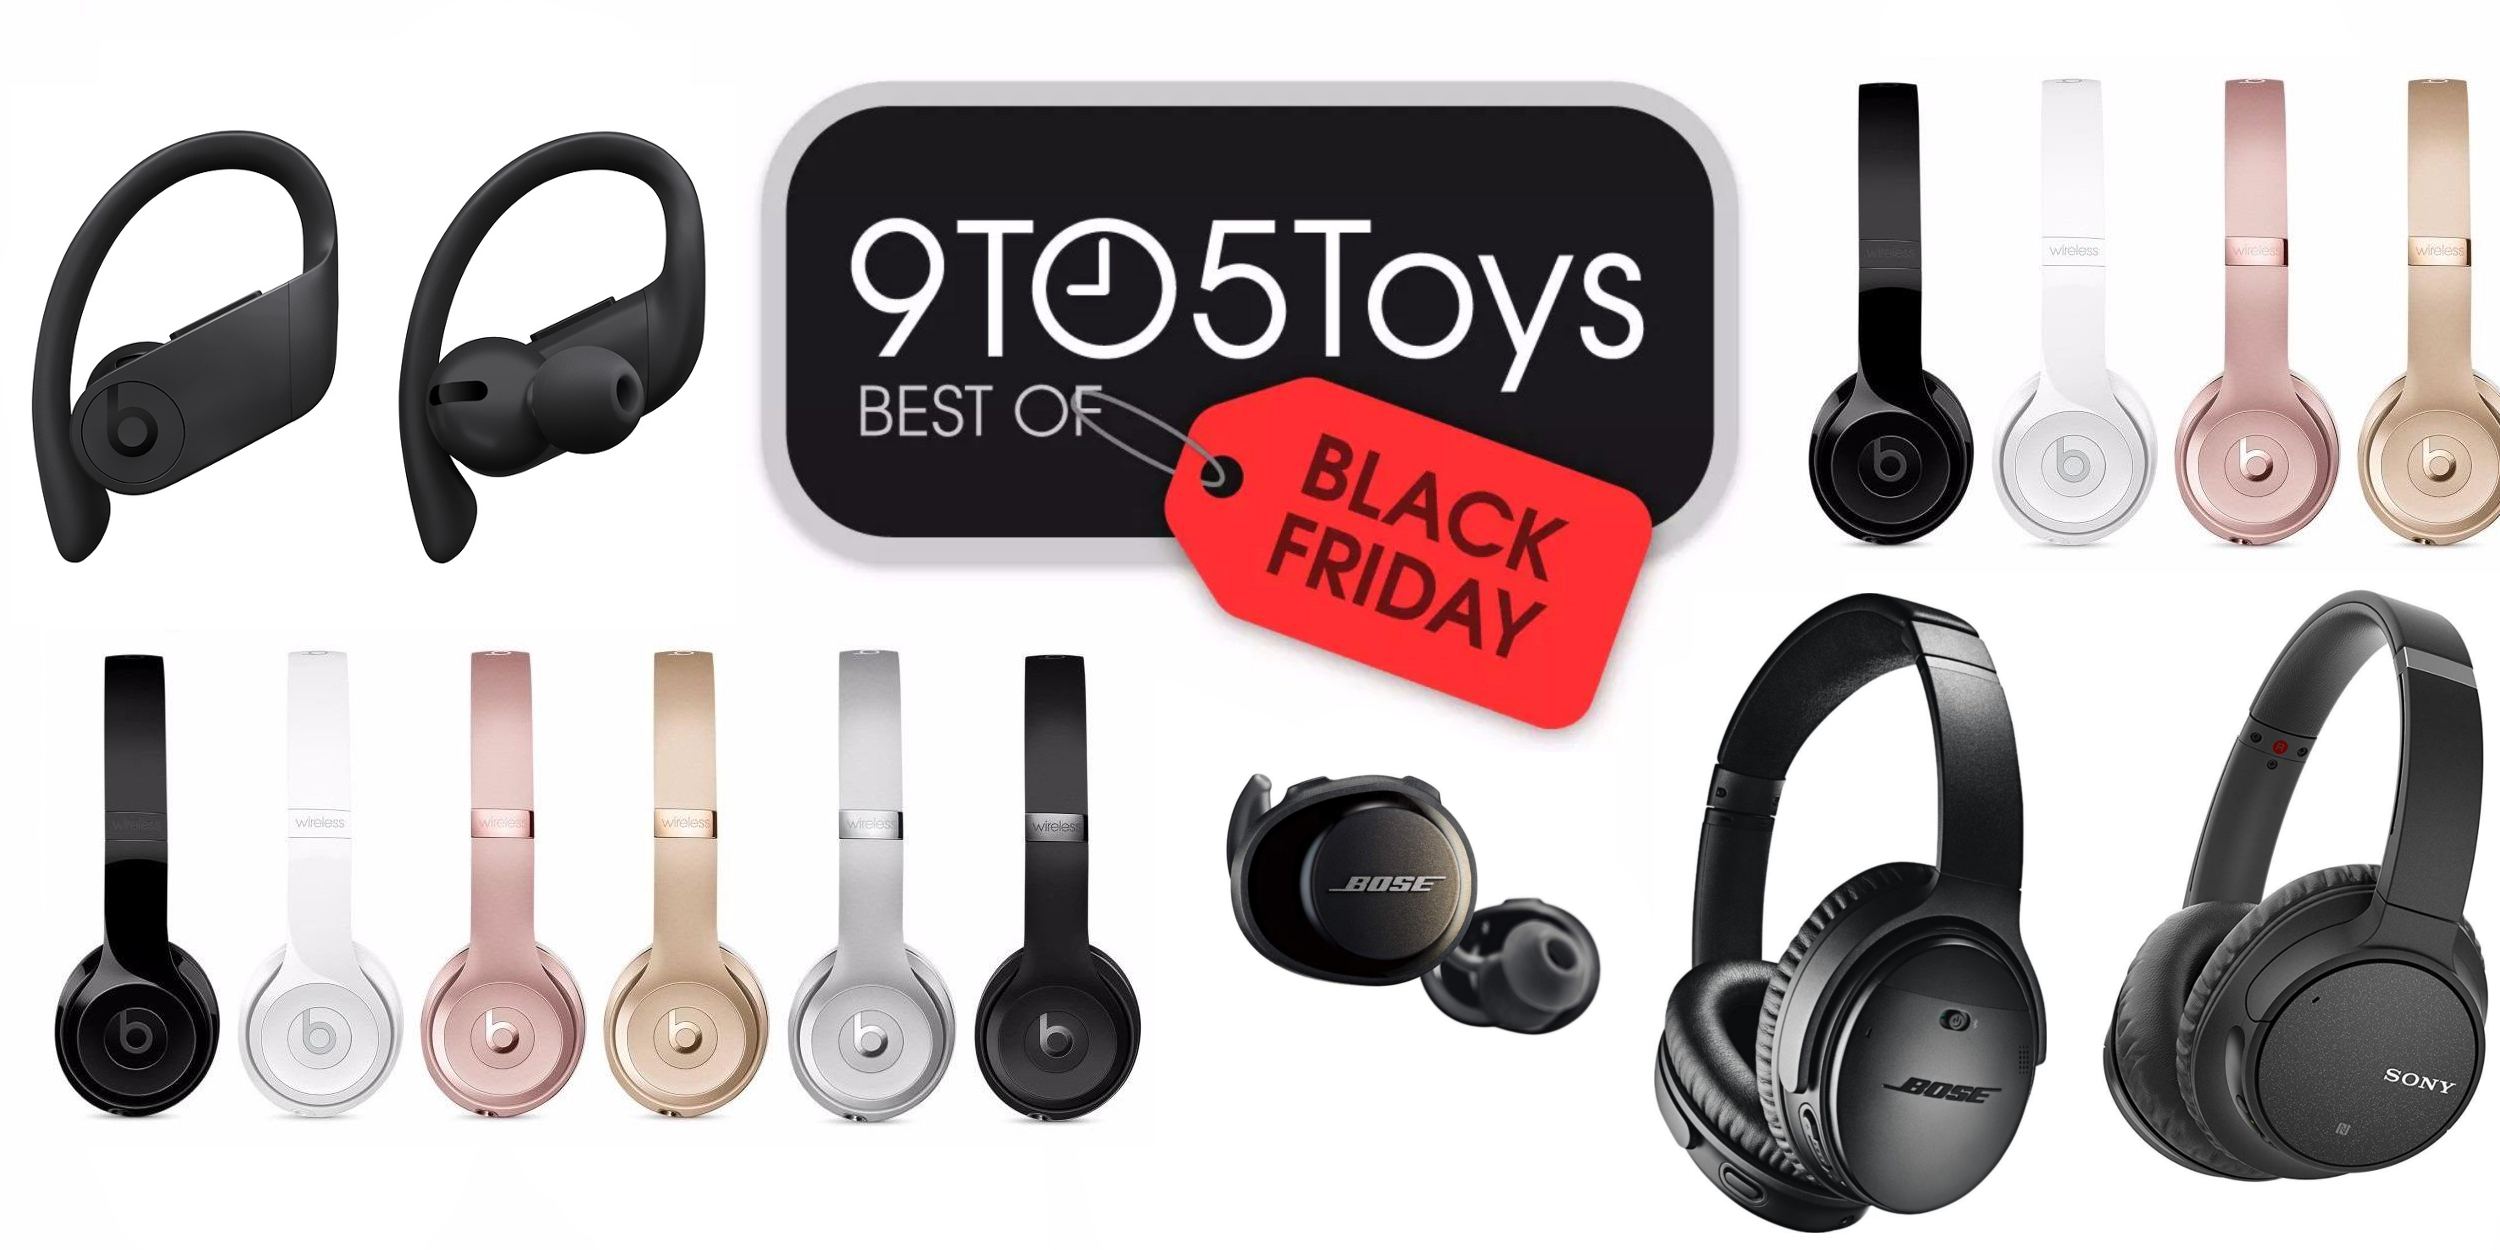 Best Black Friday headphones deals from Beats, Bose, more - 9to5Toys - What Is Bose Black Friday Deals